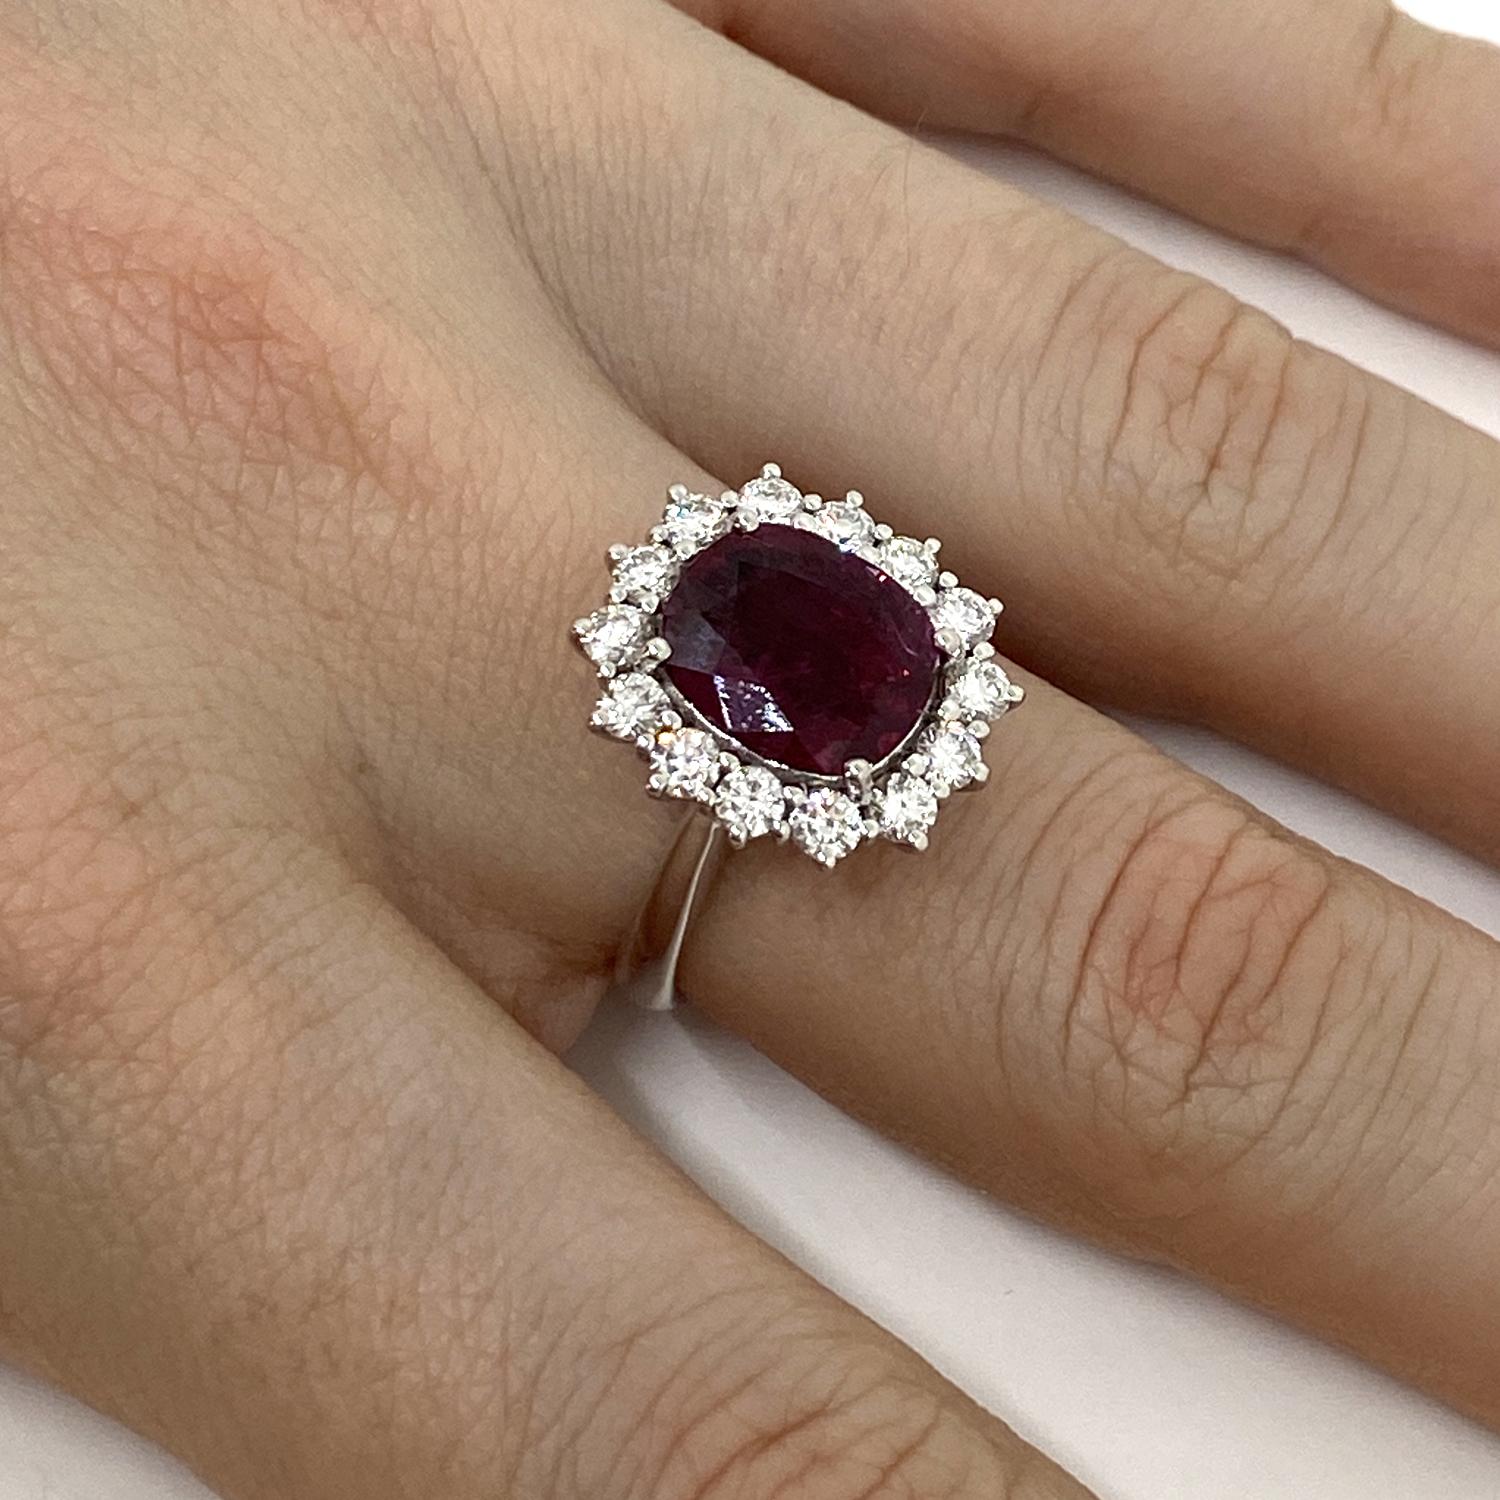 Ring made of 18kt white gold with cushion-cut natural ruby from Siam for ct.3.71 and natural white brilliant-cut diamonds for ct.1.12
-------------------------------------------------

Important Note : In order to speed up the publishing process of